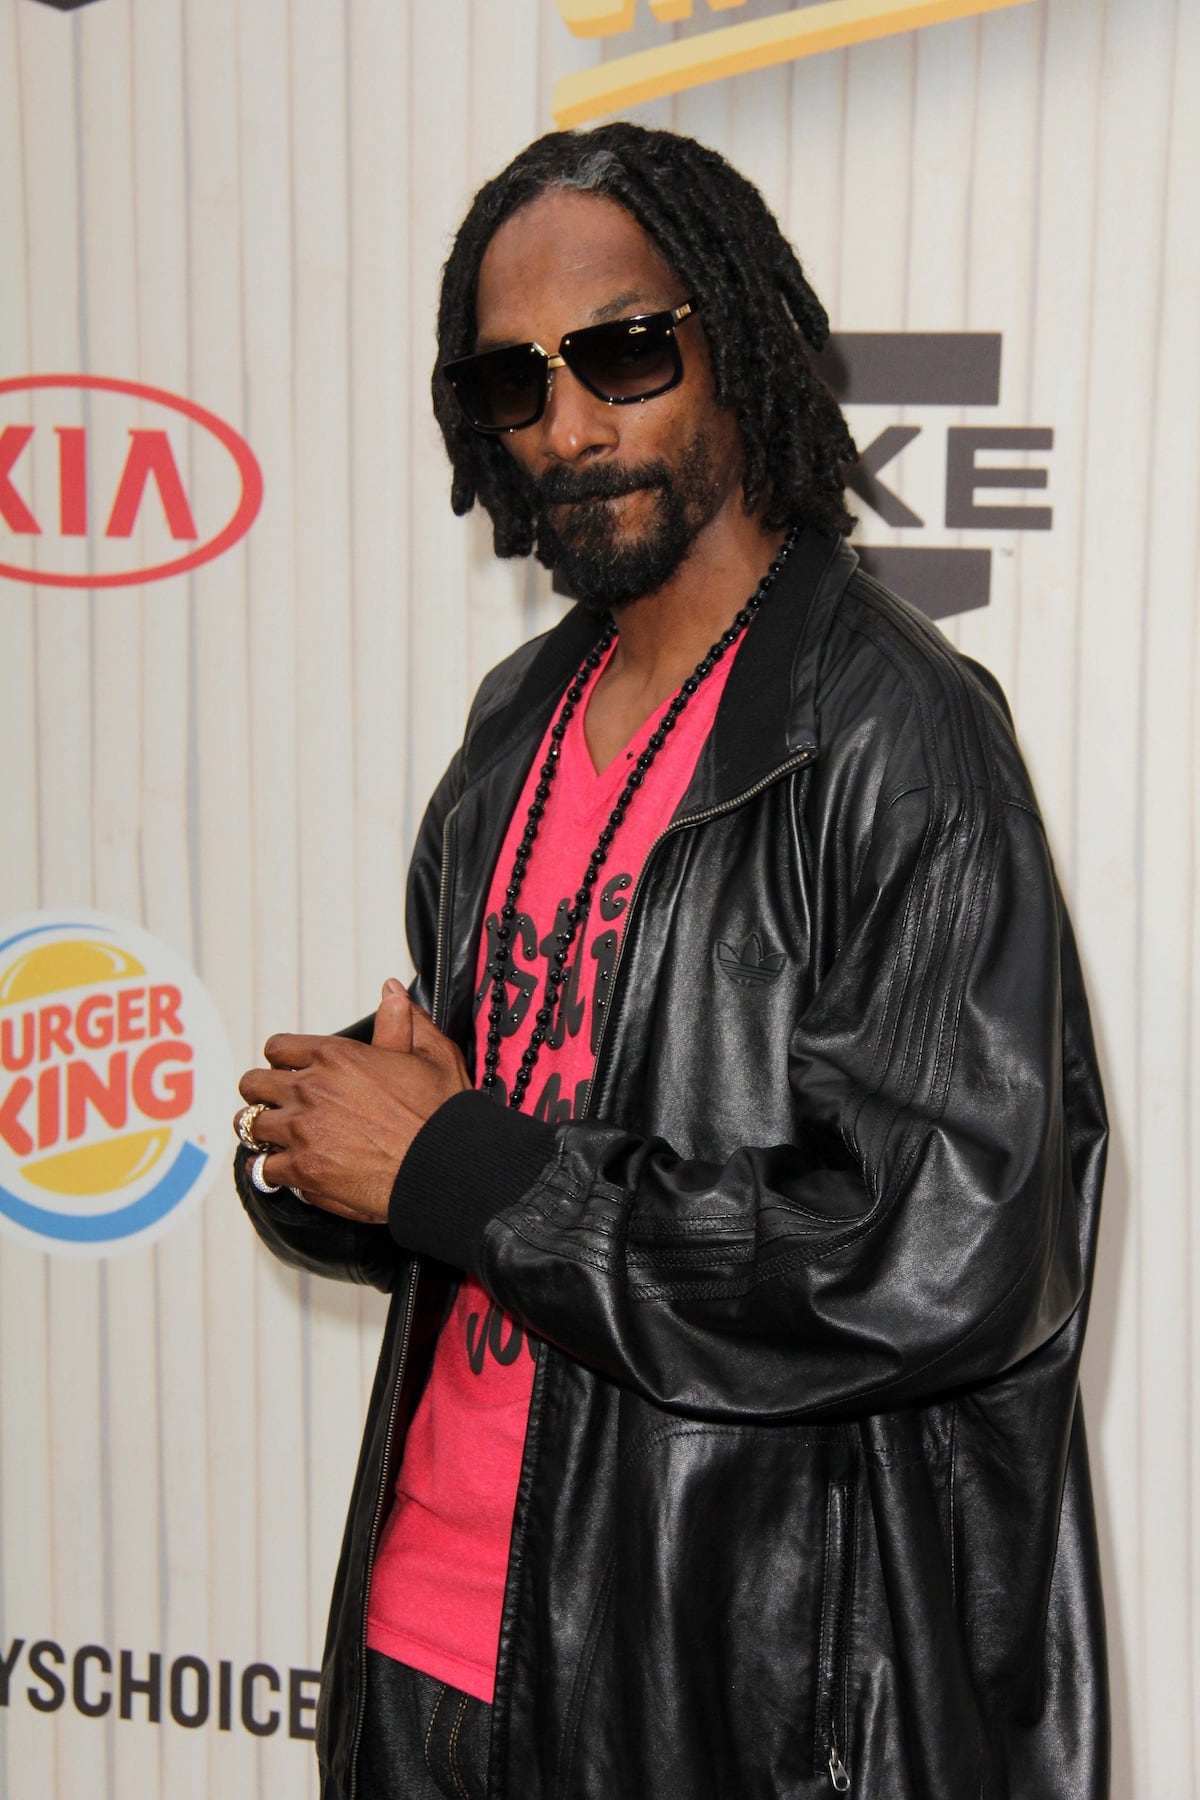 Snoop Dogg Sued For Alleged Sexual Assault Ahead Of Super Bowl Performance